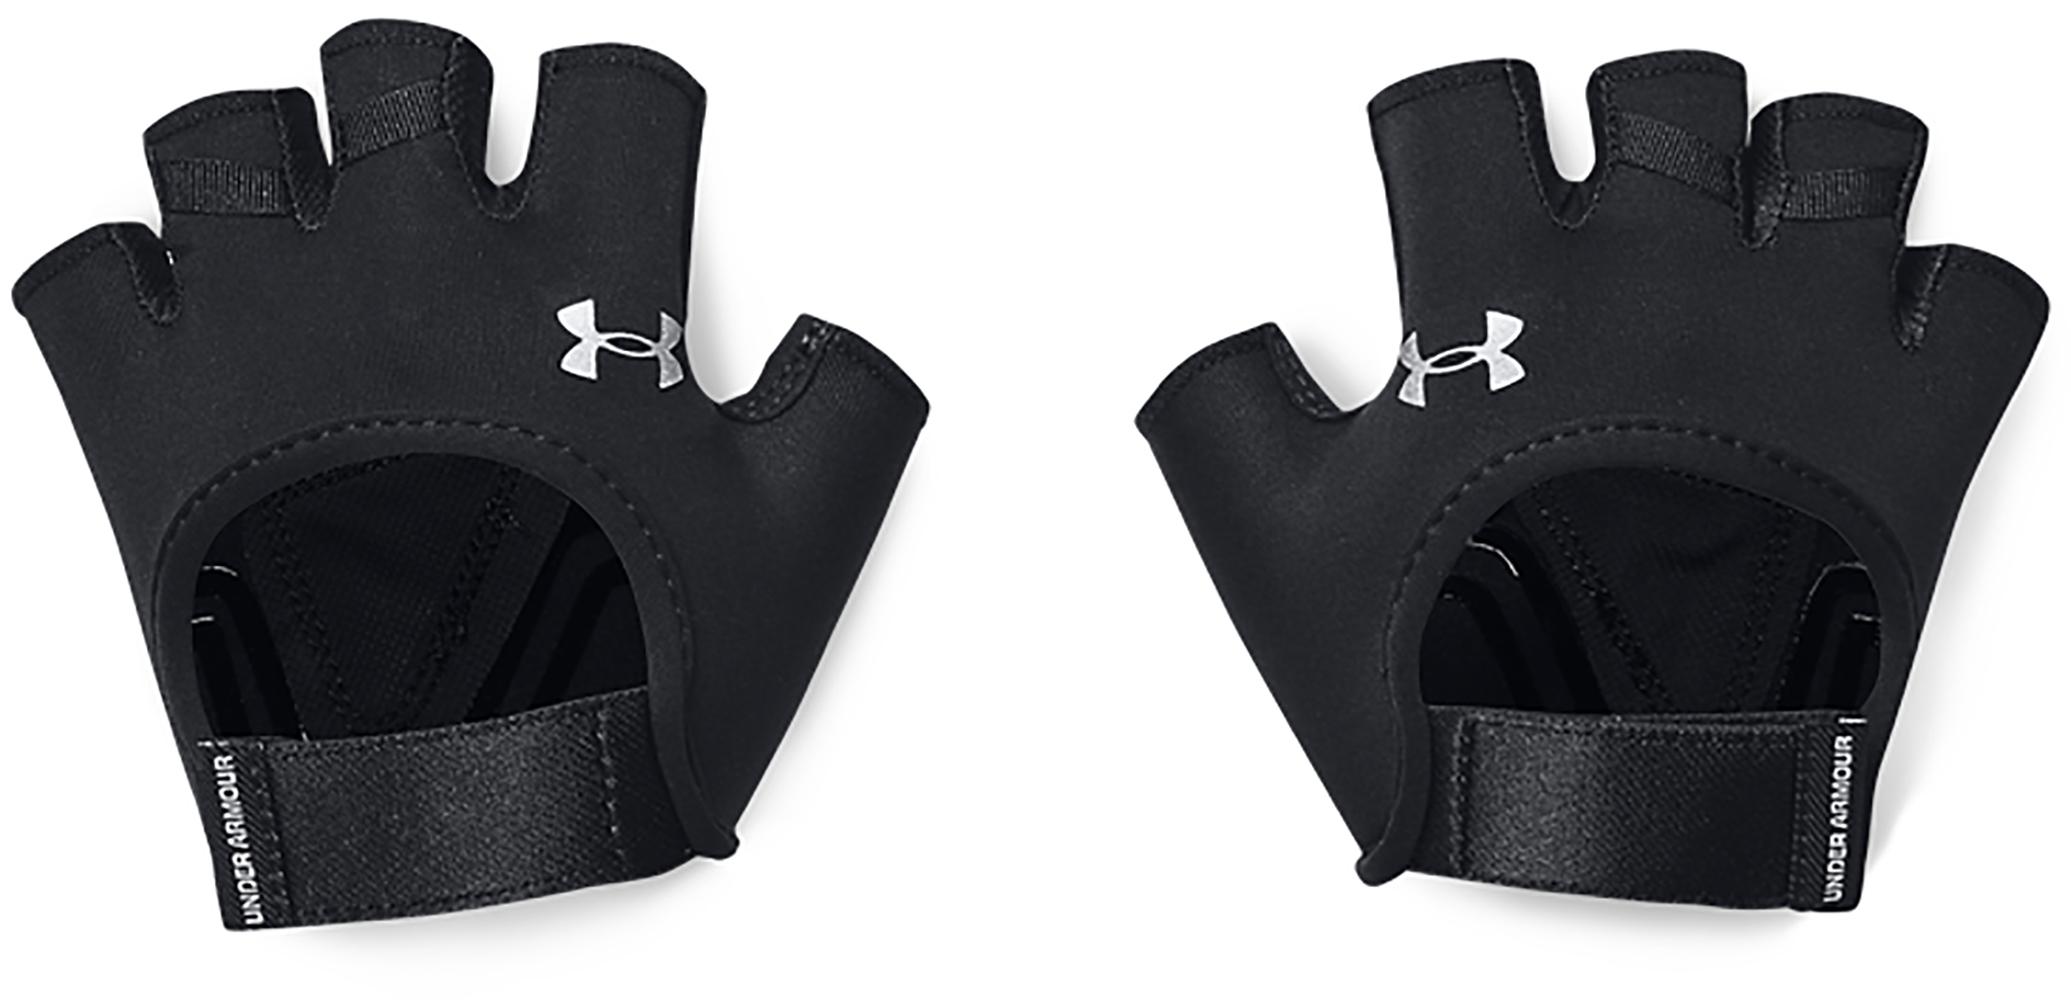 Under Armour Womens Training Gloves - Black/silver